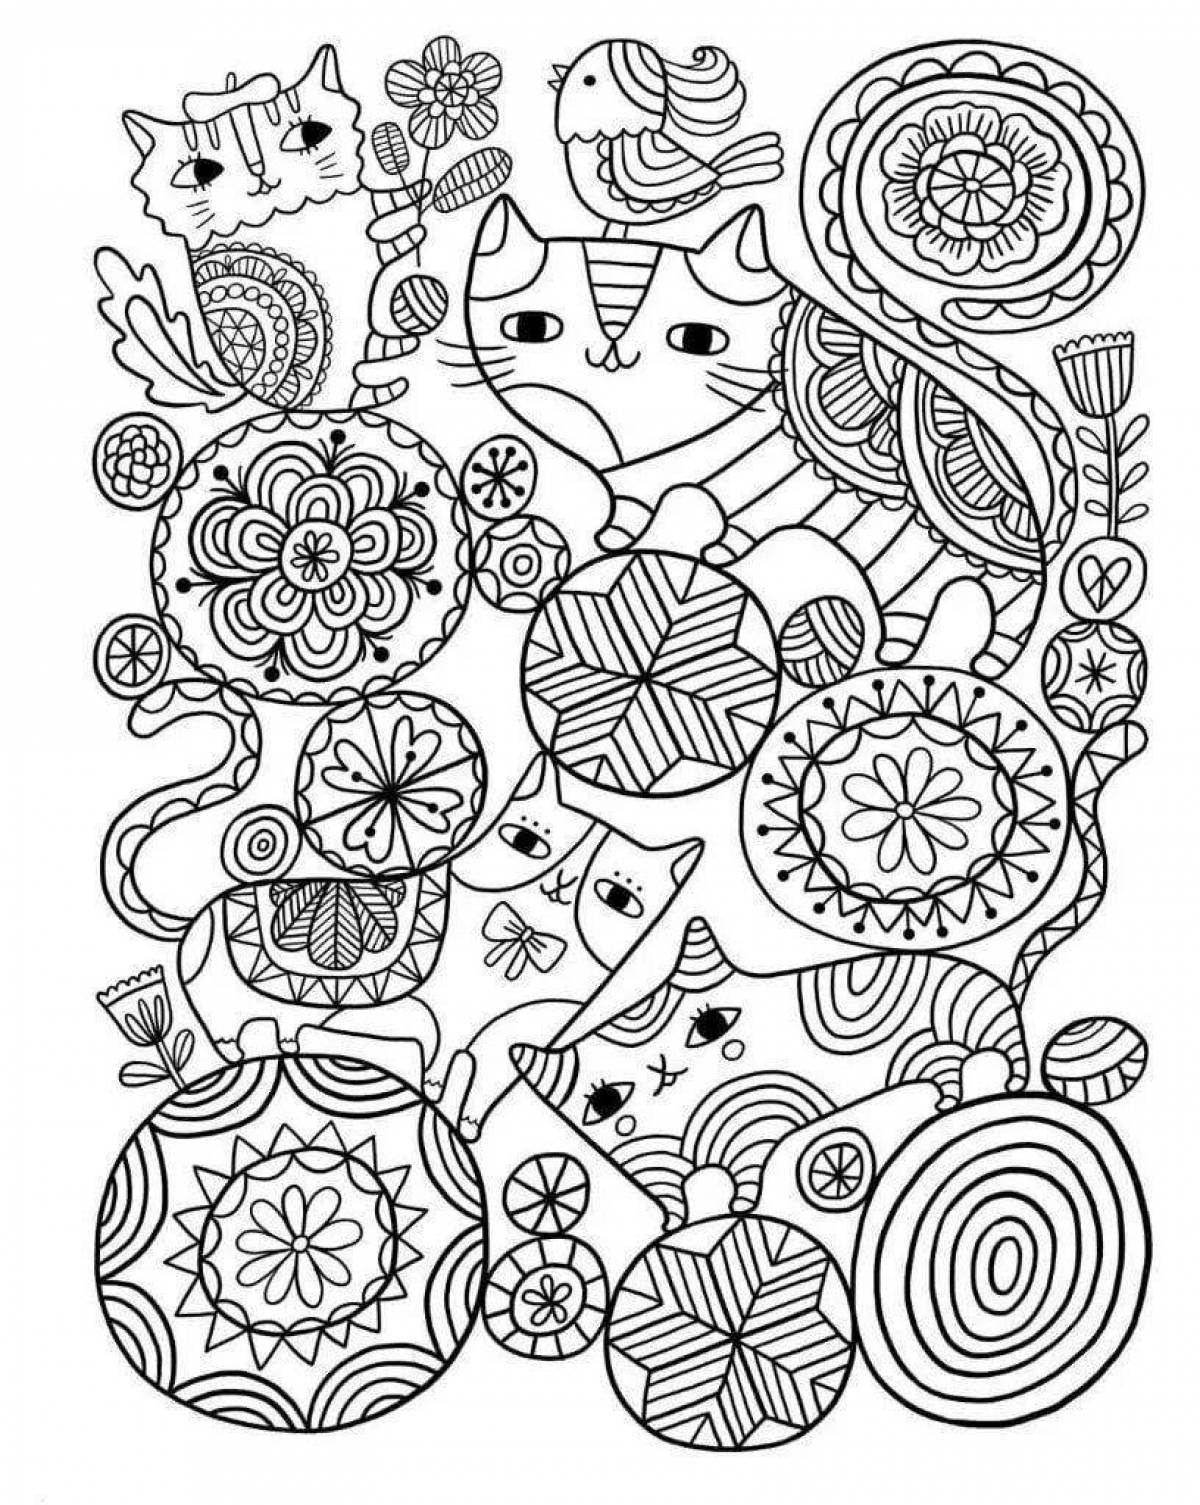 Calm relaxation coloring book for kids